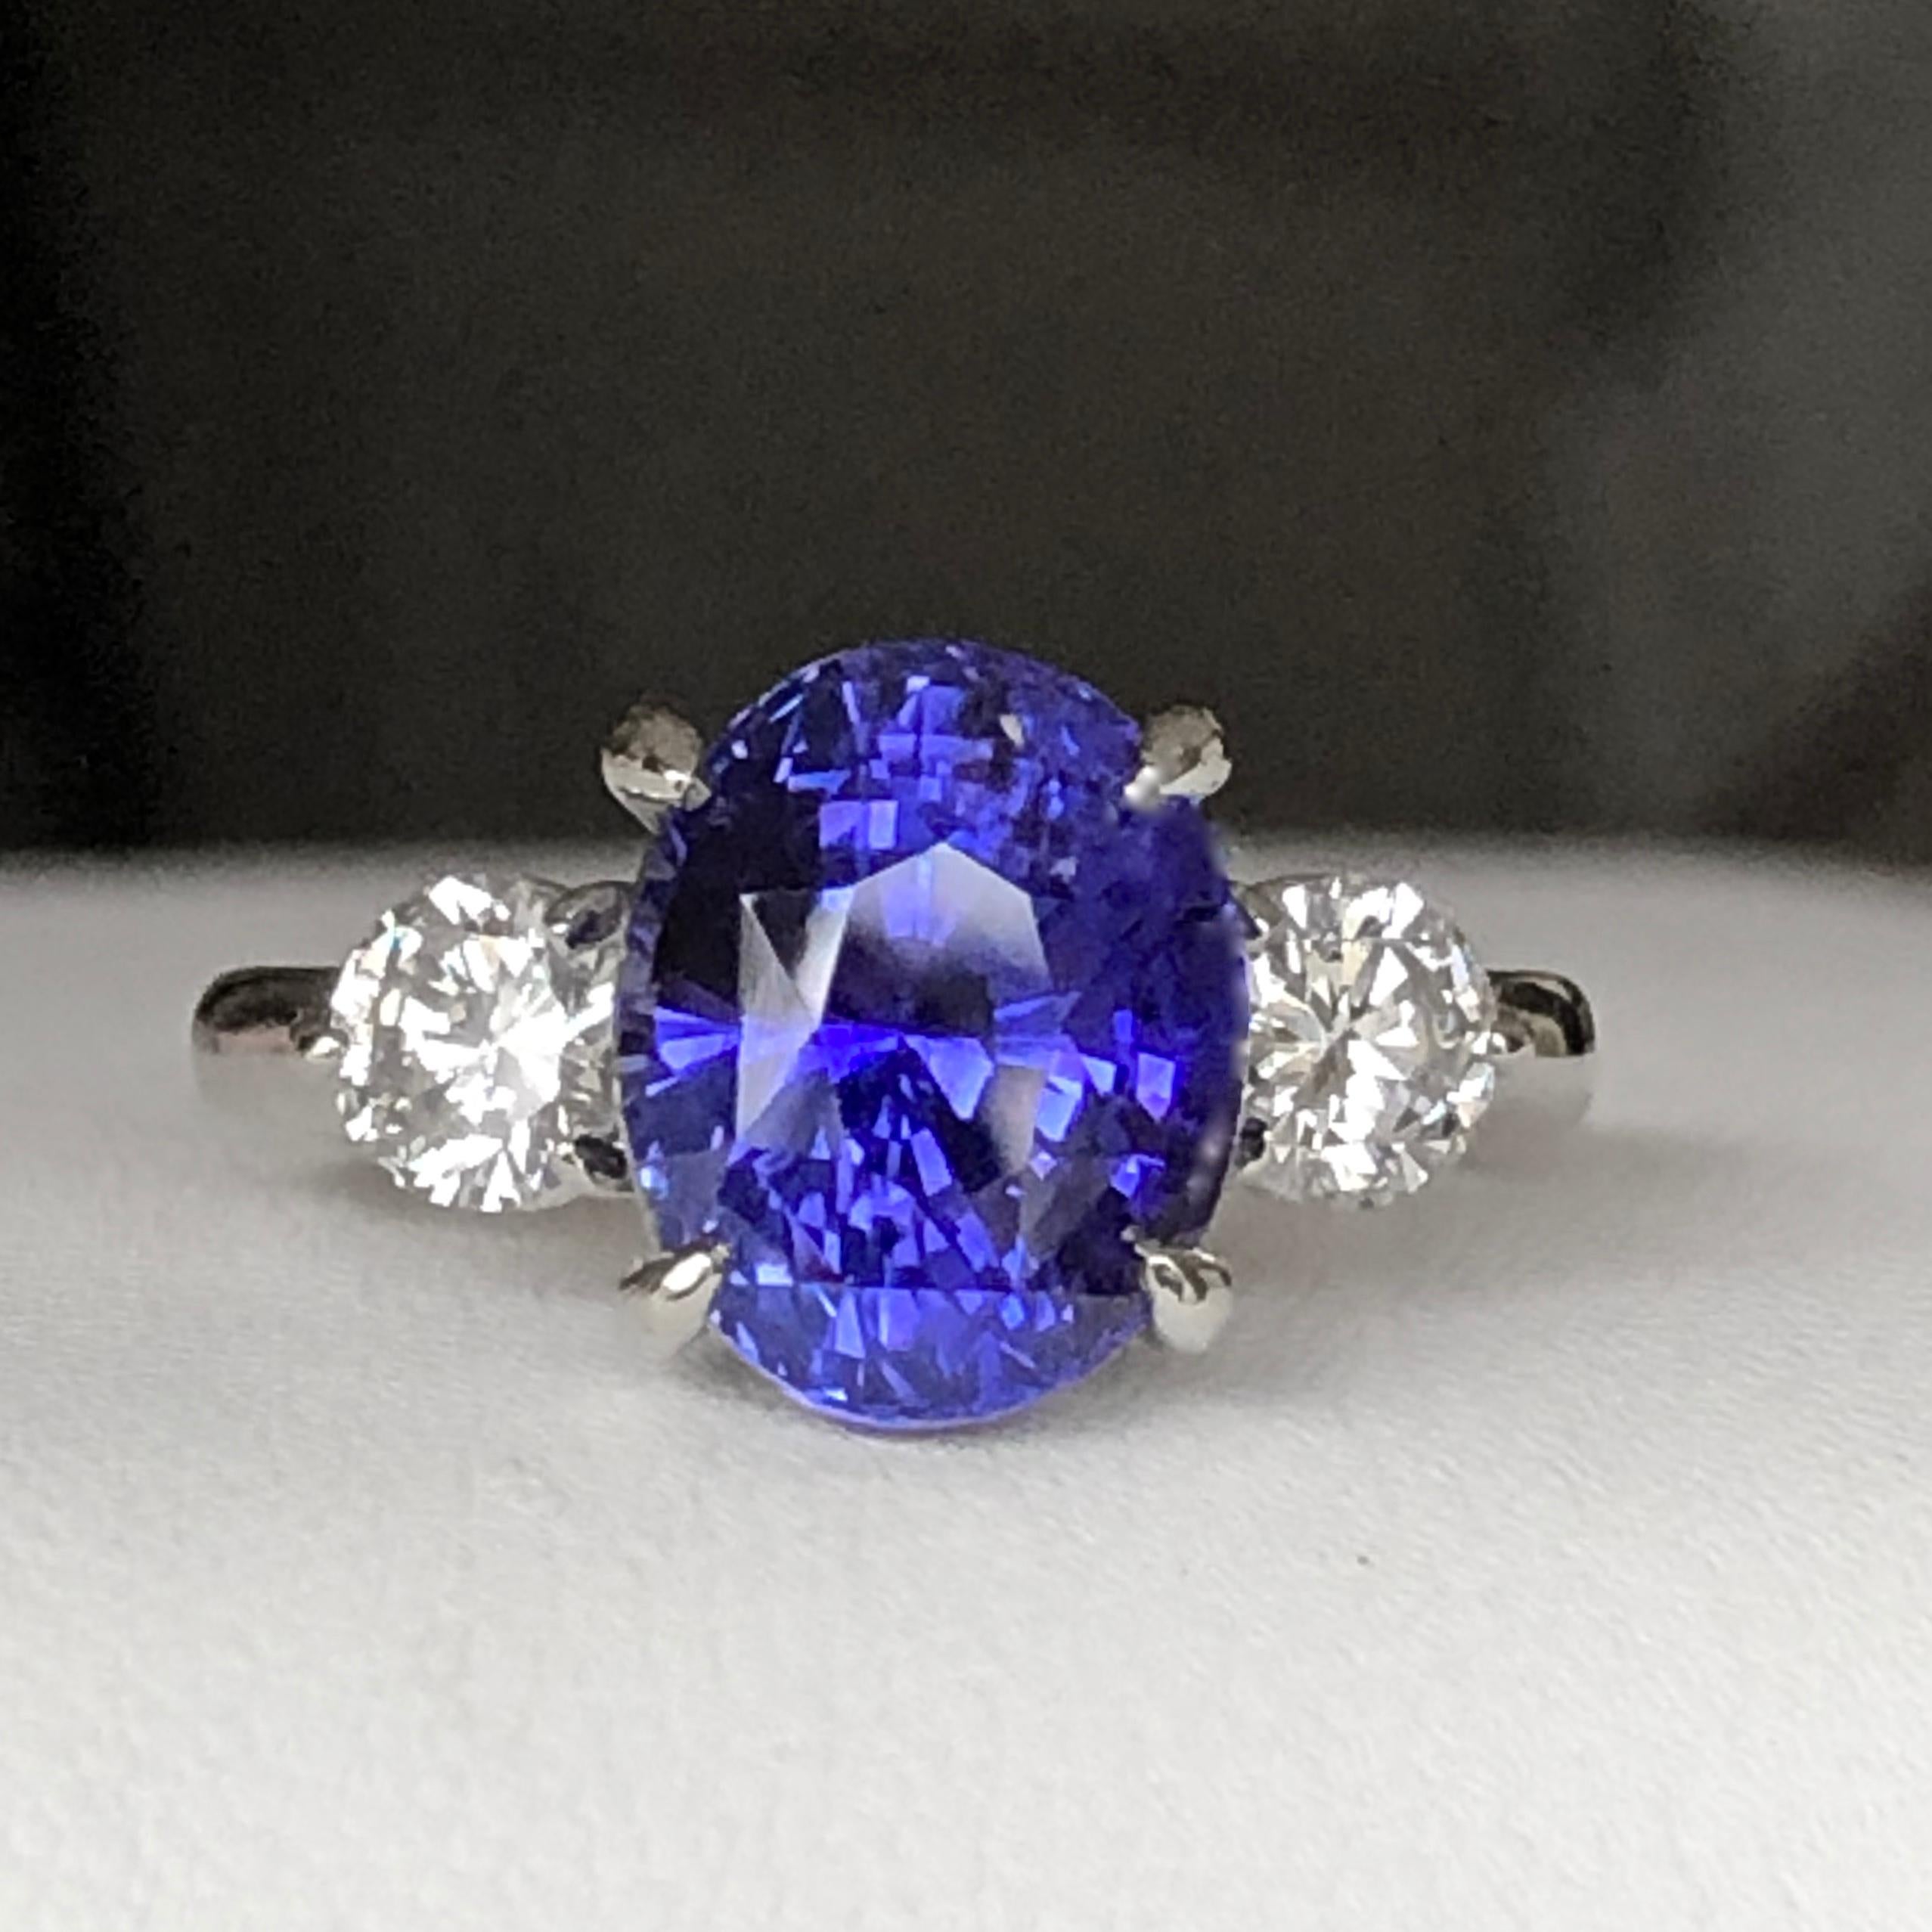 GIA no heat certified blue oval cut Sapphire. 6.43 carat with a white round brilliant cut diamond on each side. Solid 18K white gold setting. 1 oval cut Ceylon (Sri Lanka) Sapphire, total weight 6.43cts, 10.87x8.83x8.03mm, no heat and no